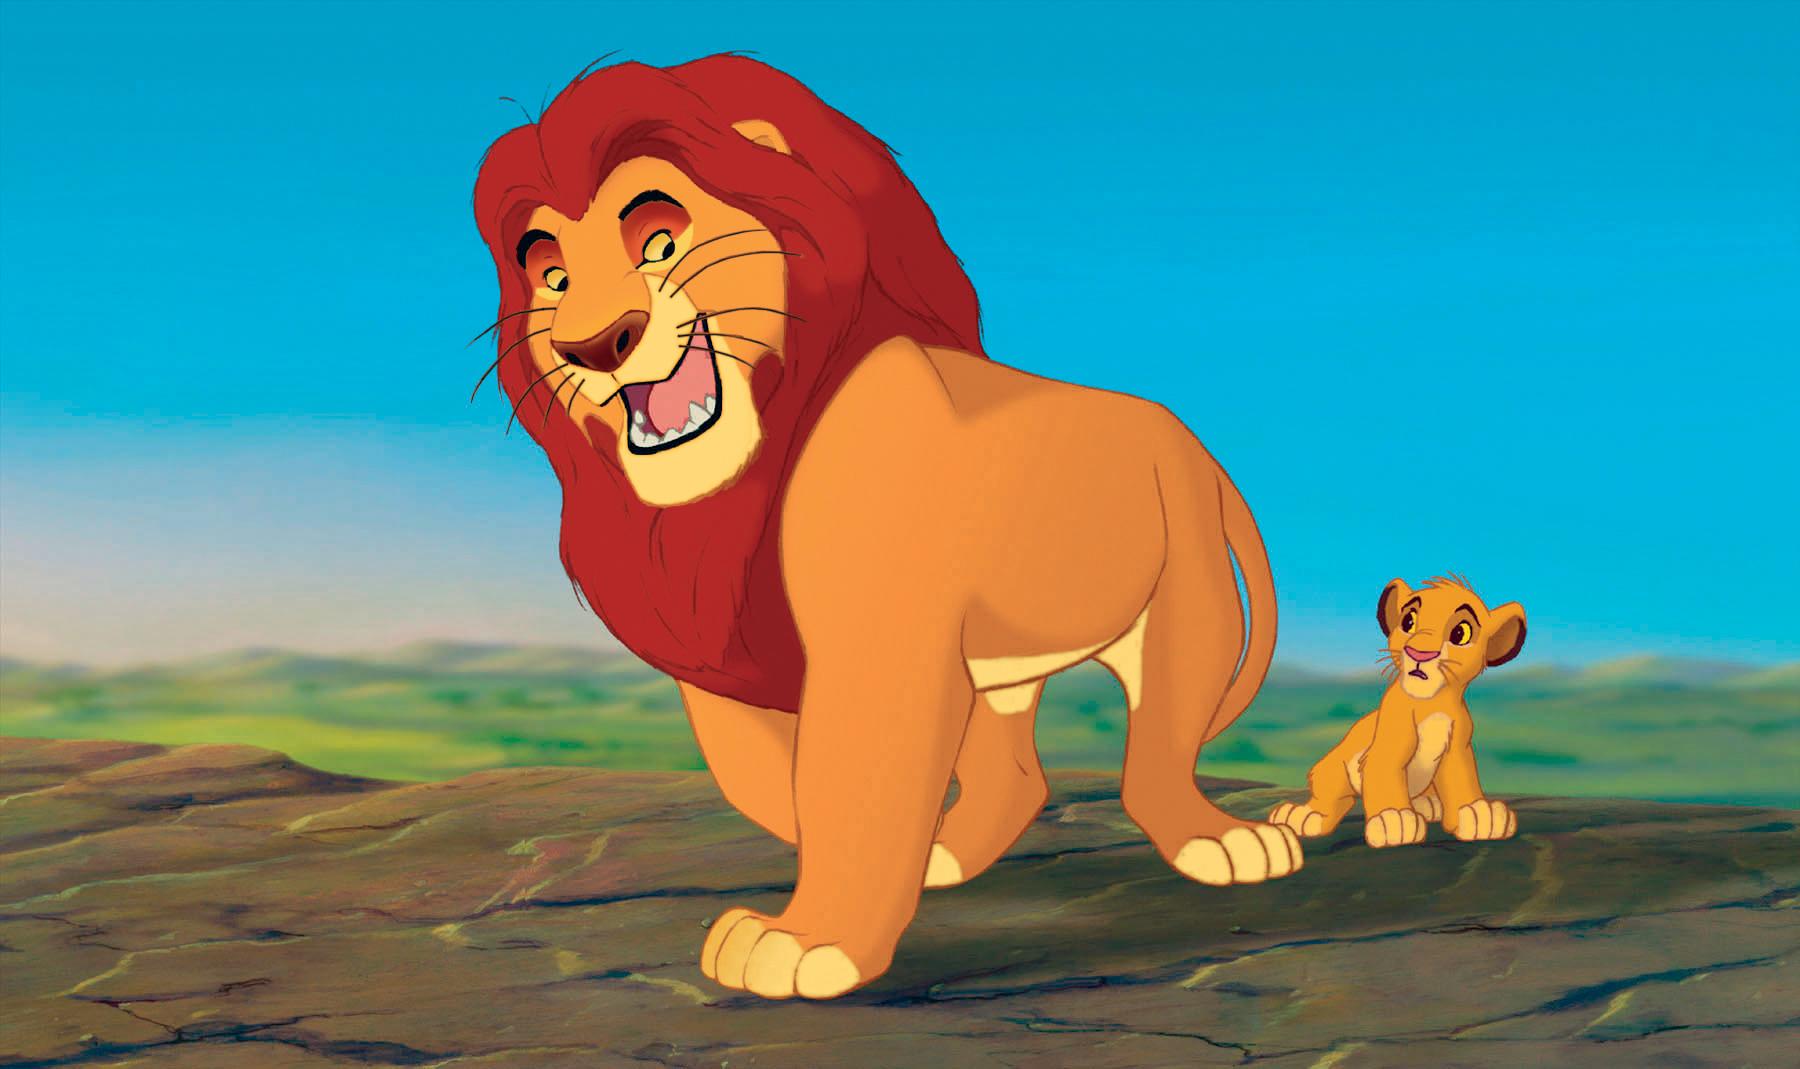 Top 10 Disney animated movies of all time